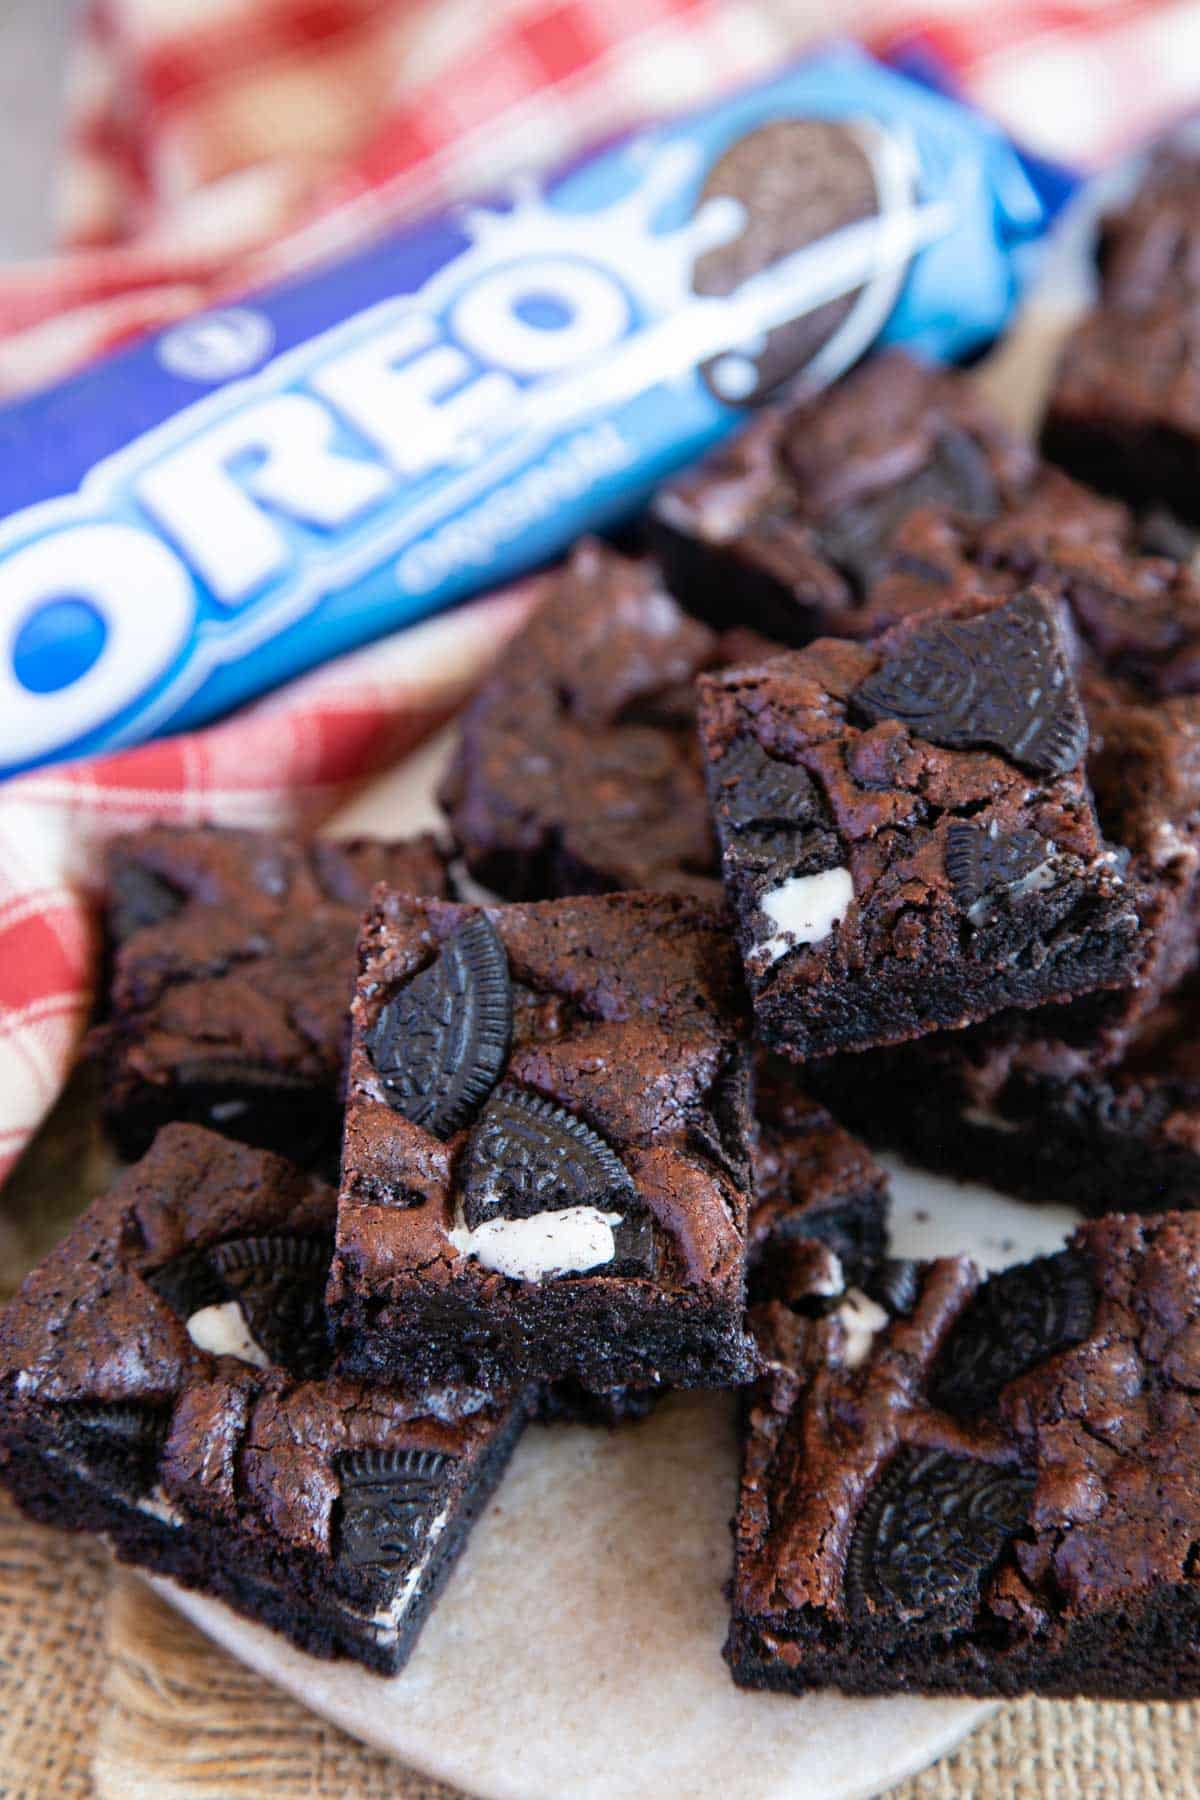 A pile of cookies and cream brownies next to a packet of Oreo biscuits - irresistible.